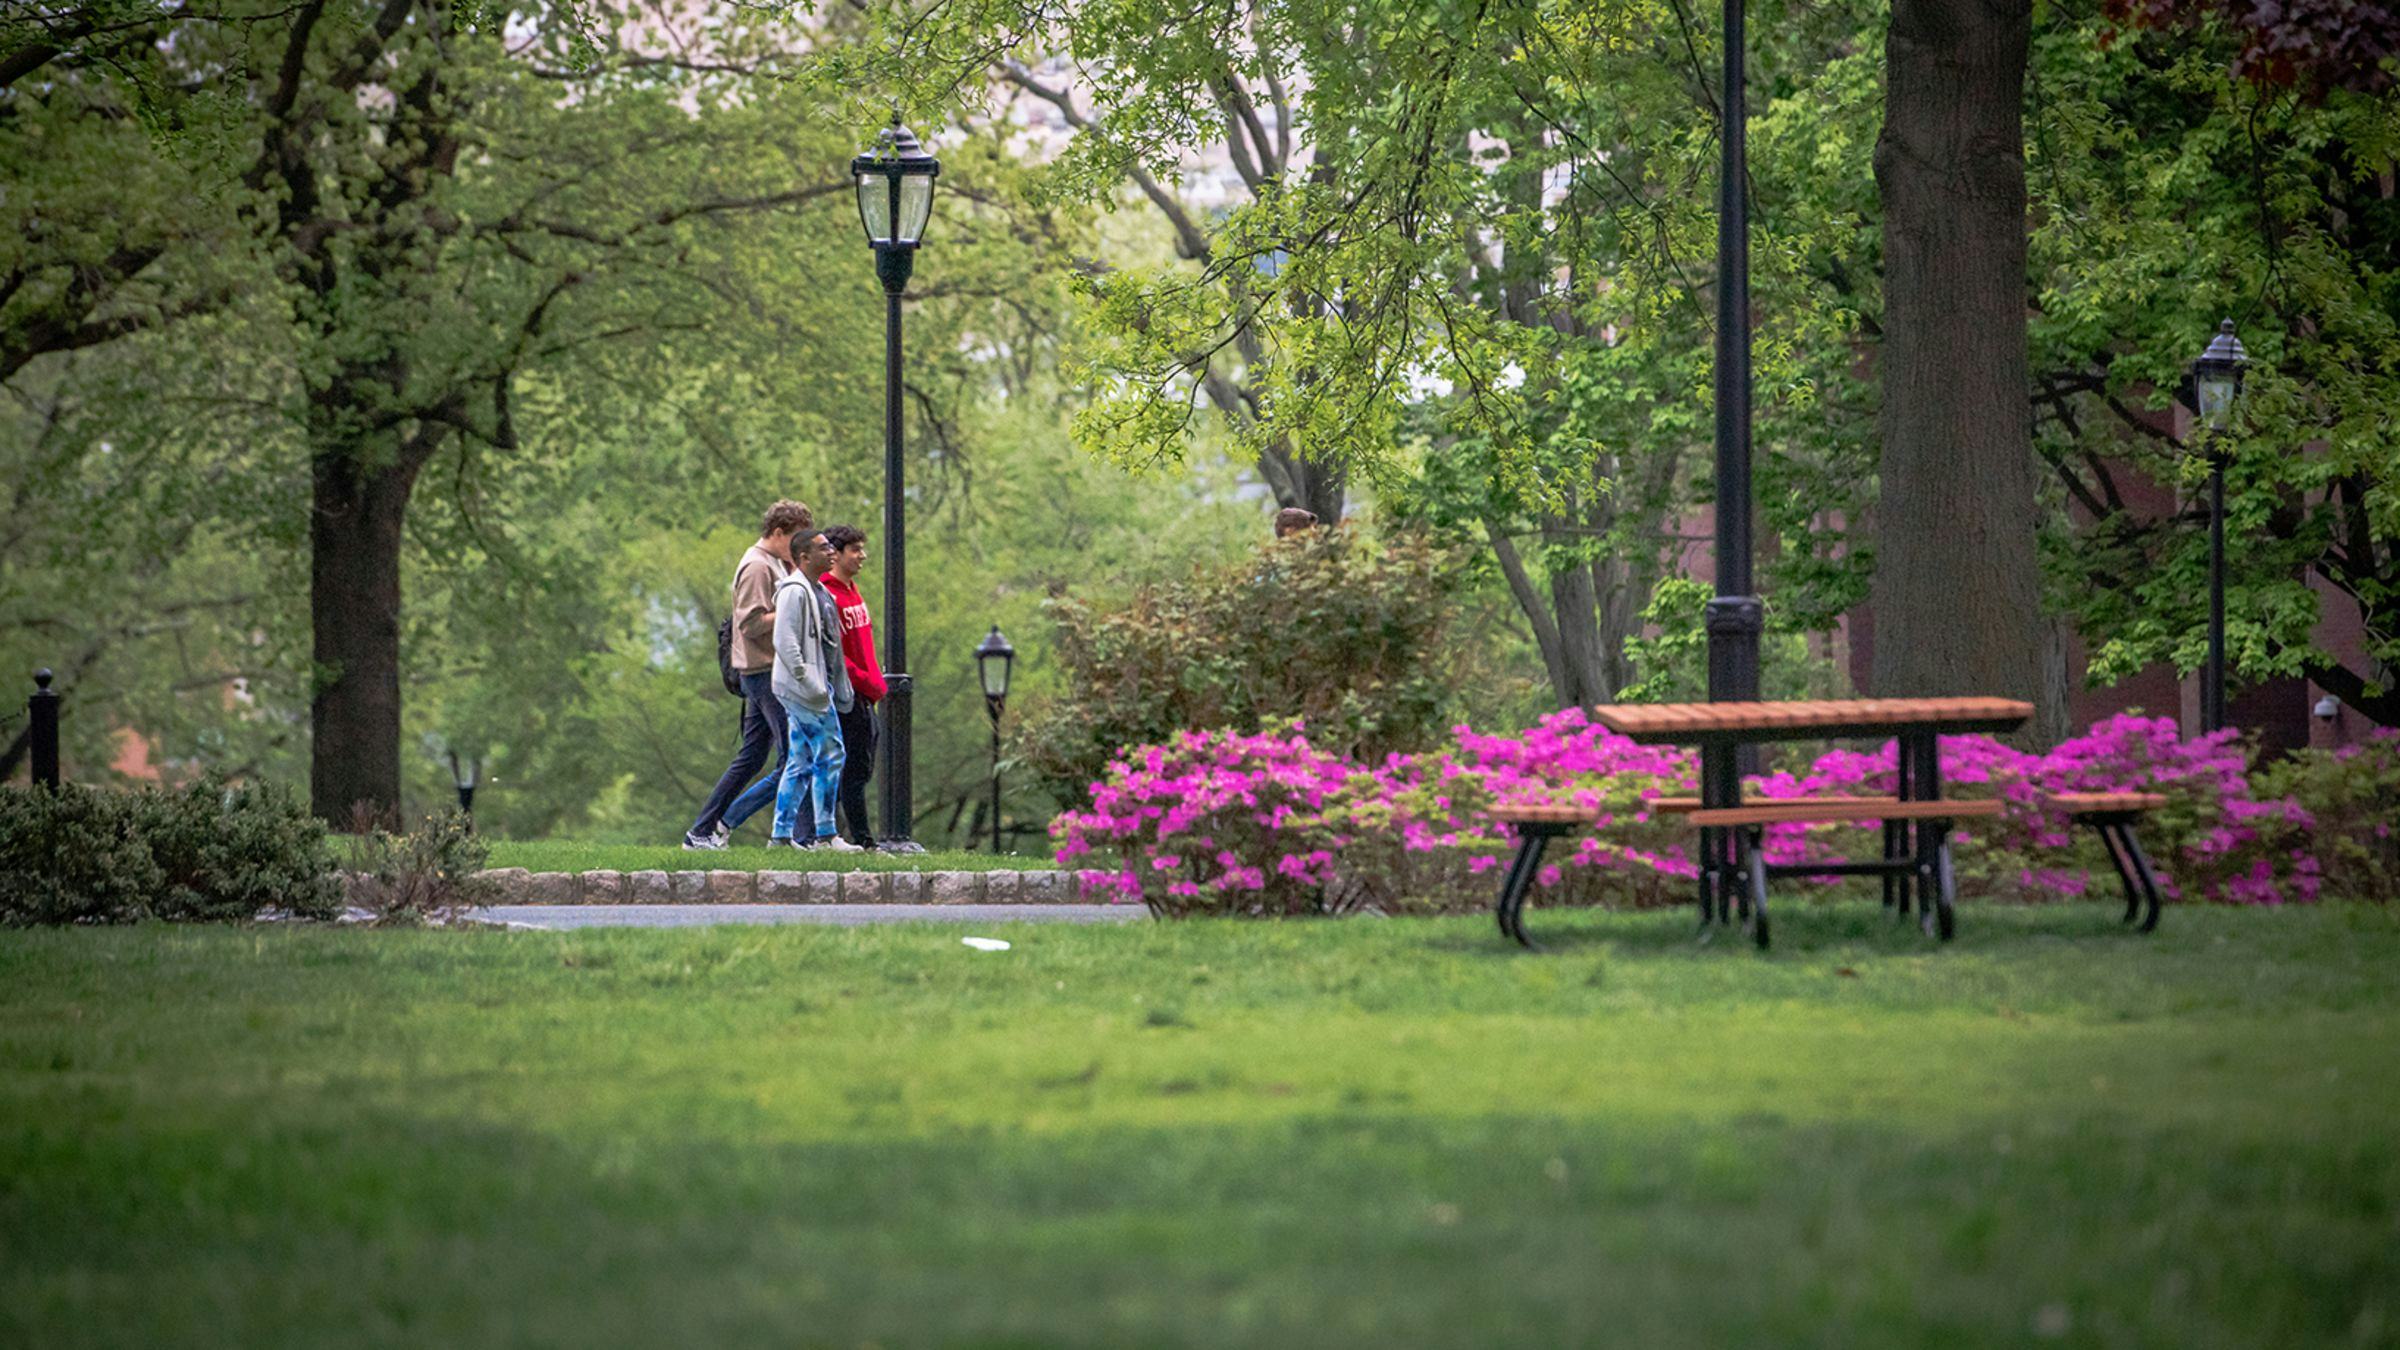 Students walking through campus in Spring